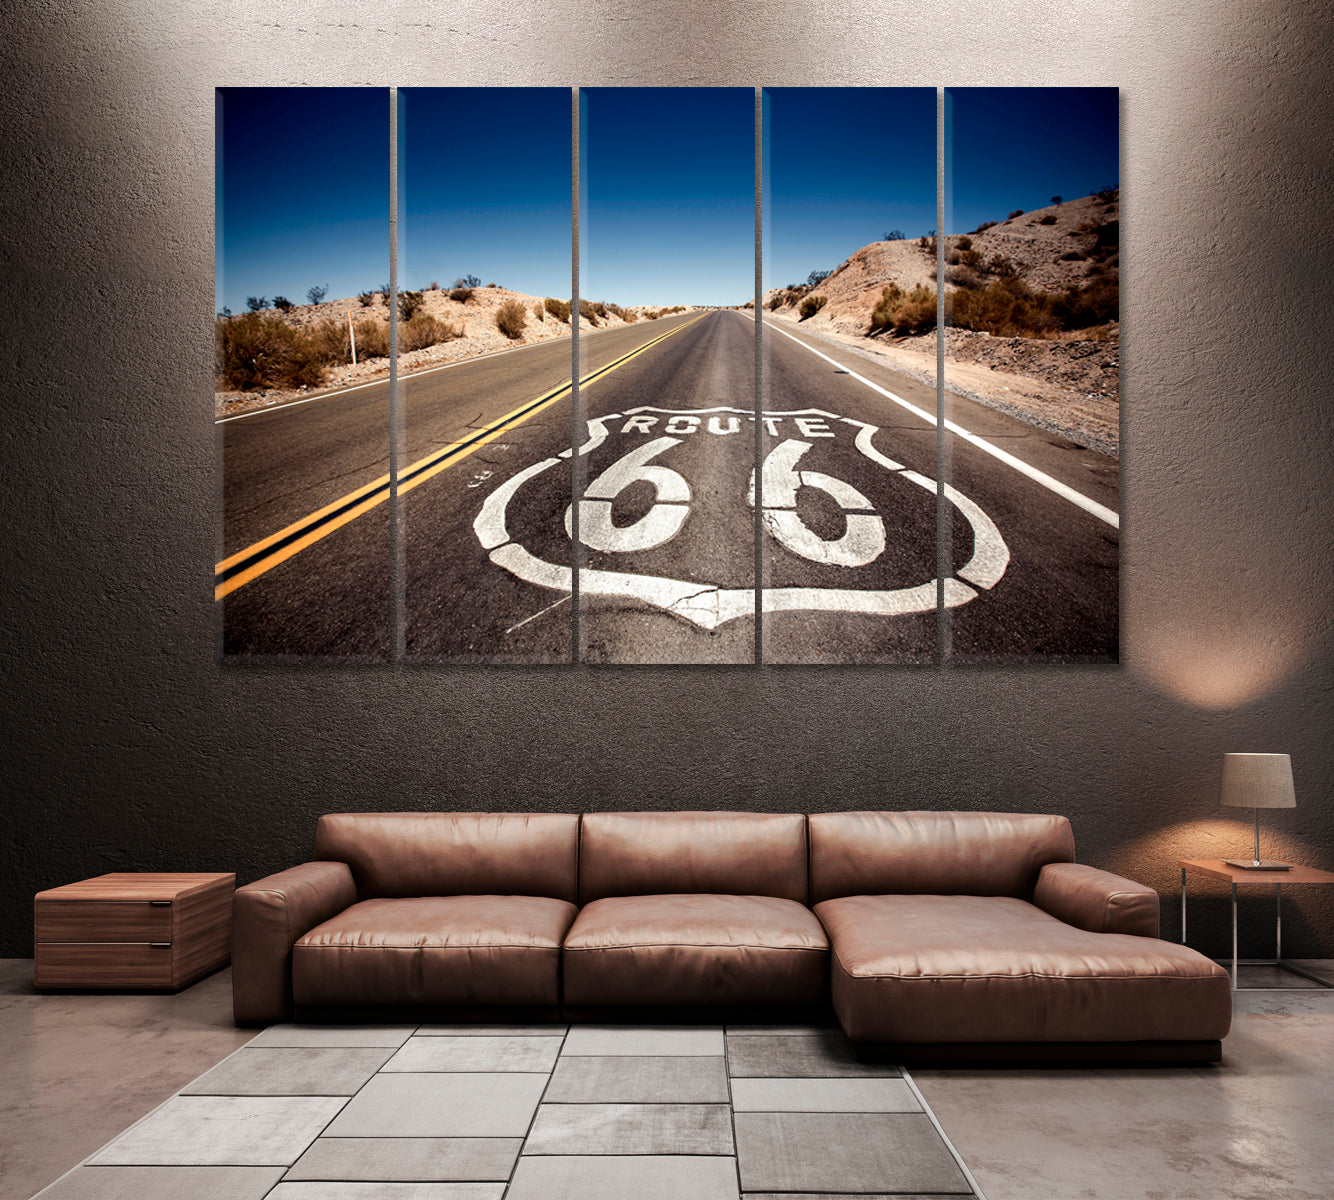 Route 66 California Canvas Print ArtLexy 5 Panels 36"x24" inches 